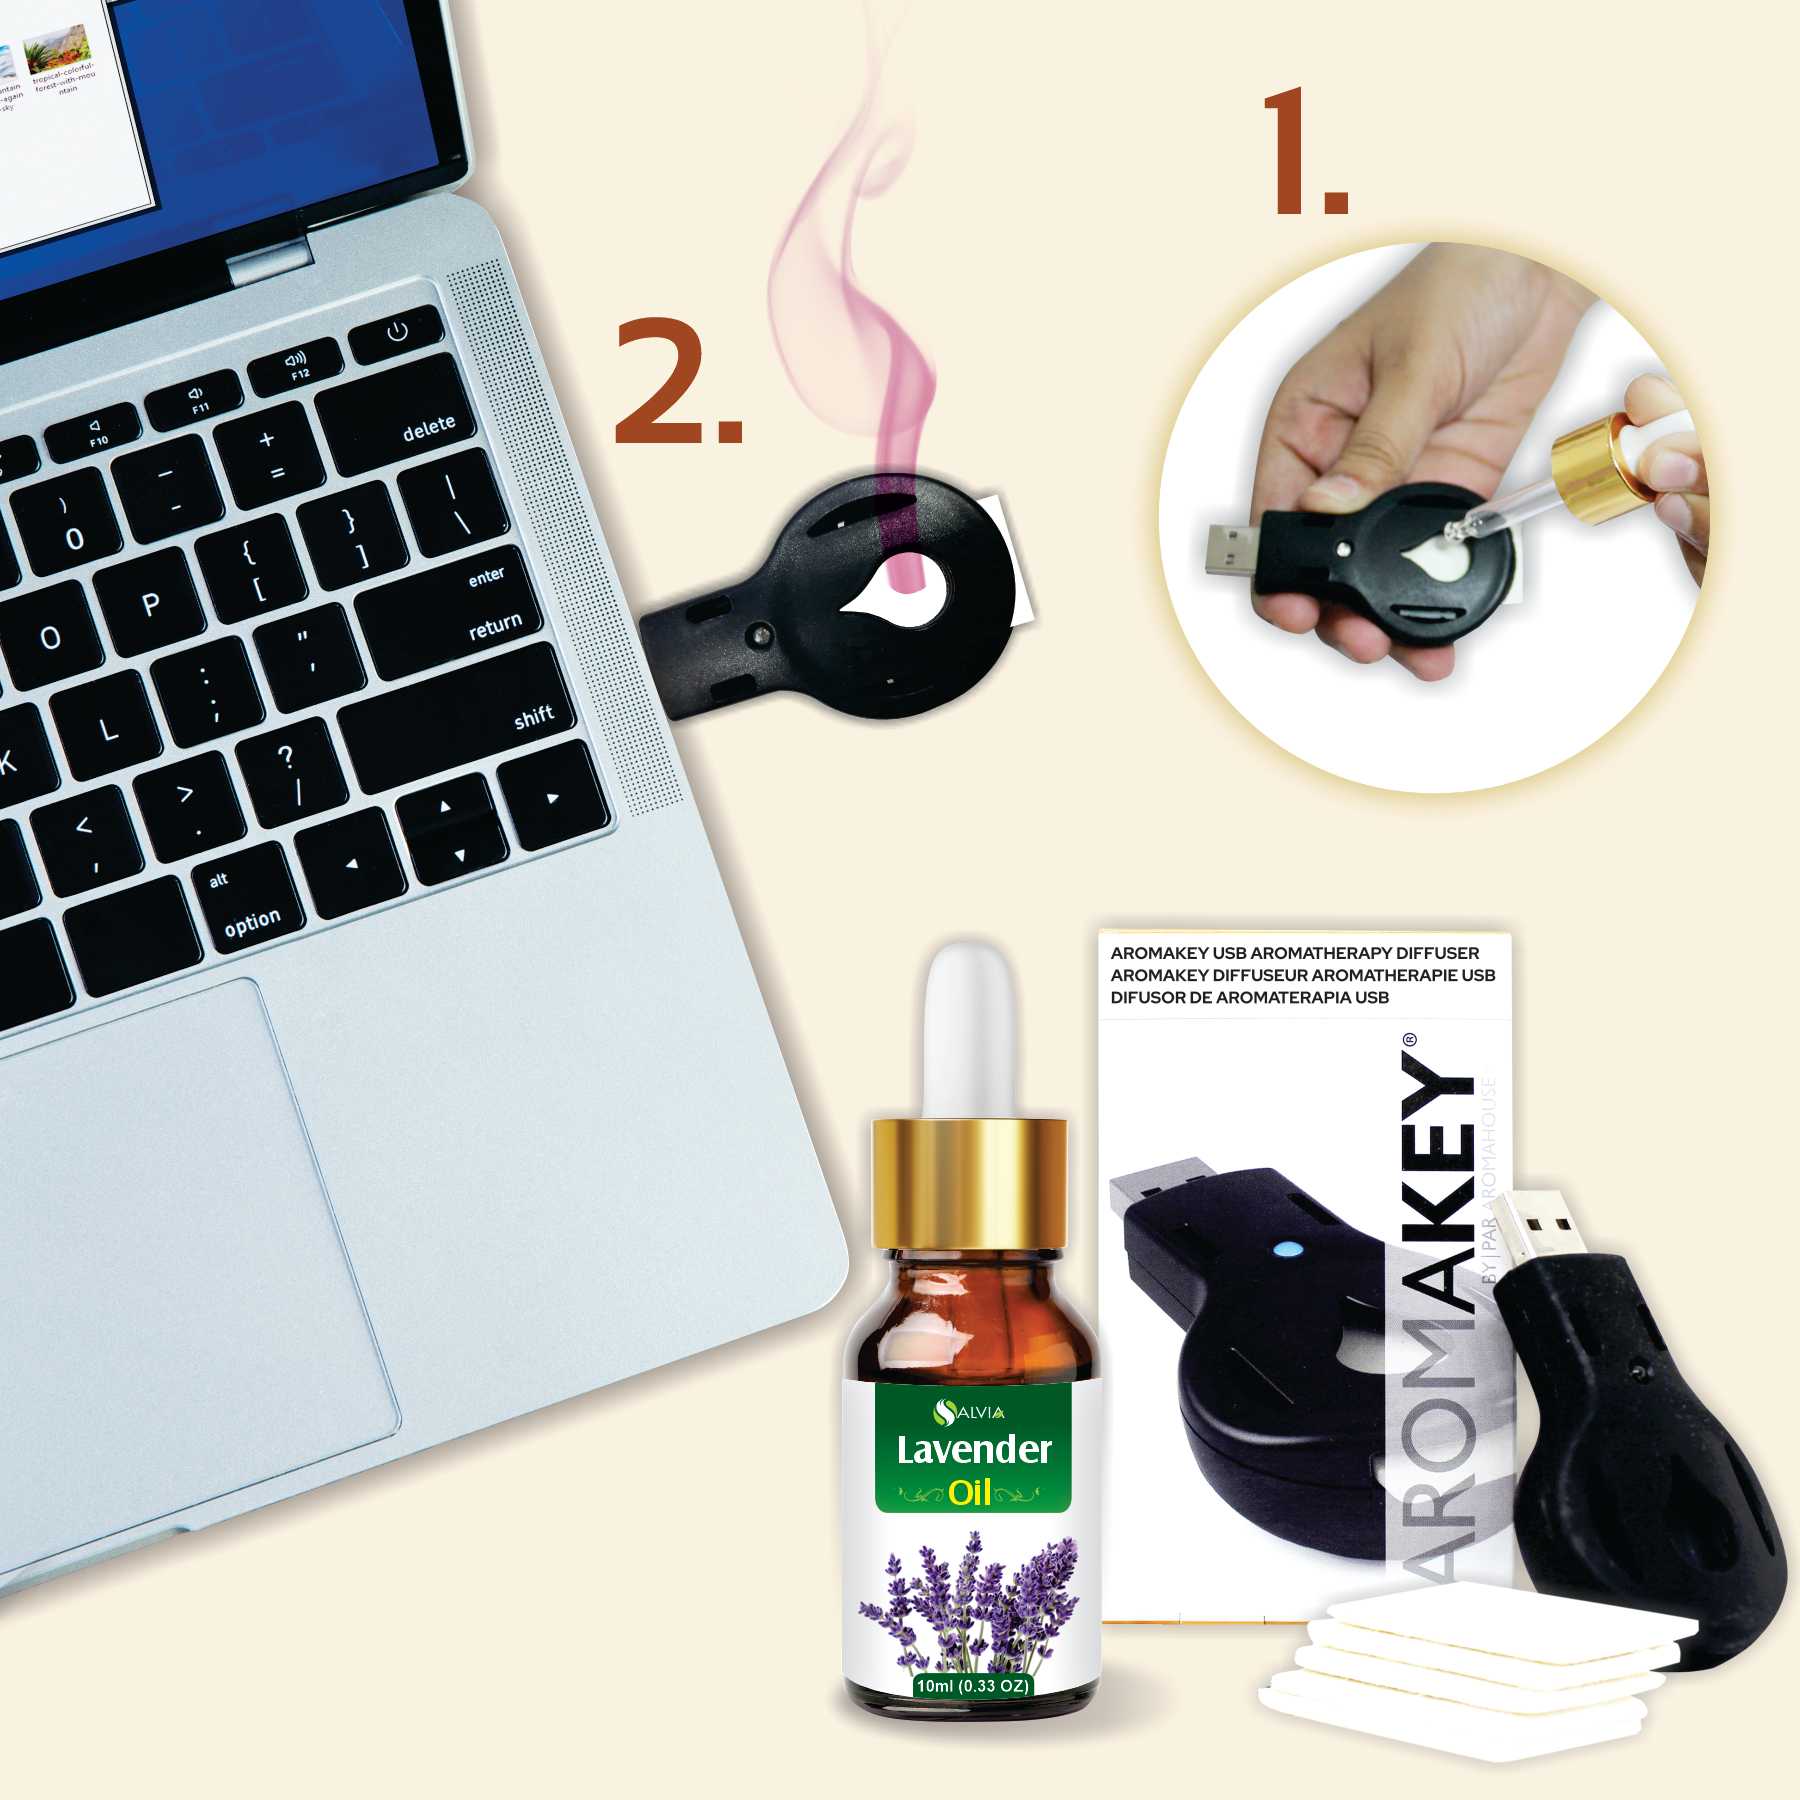 Salvia Gifts,USB Diffuser Combo Lavender Oil with Laptop USB Key Diffuser